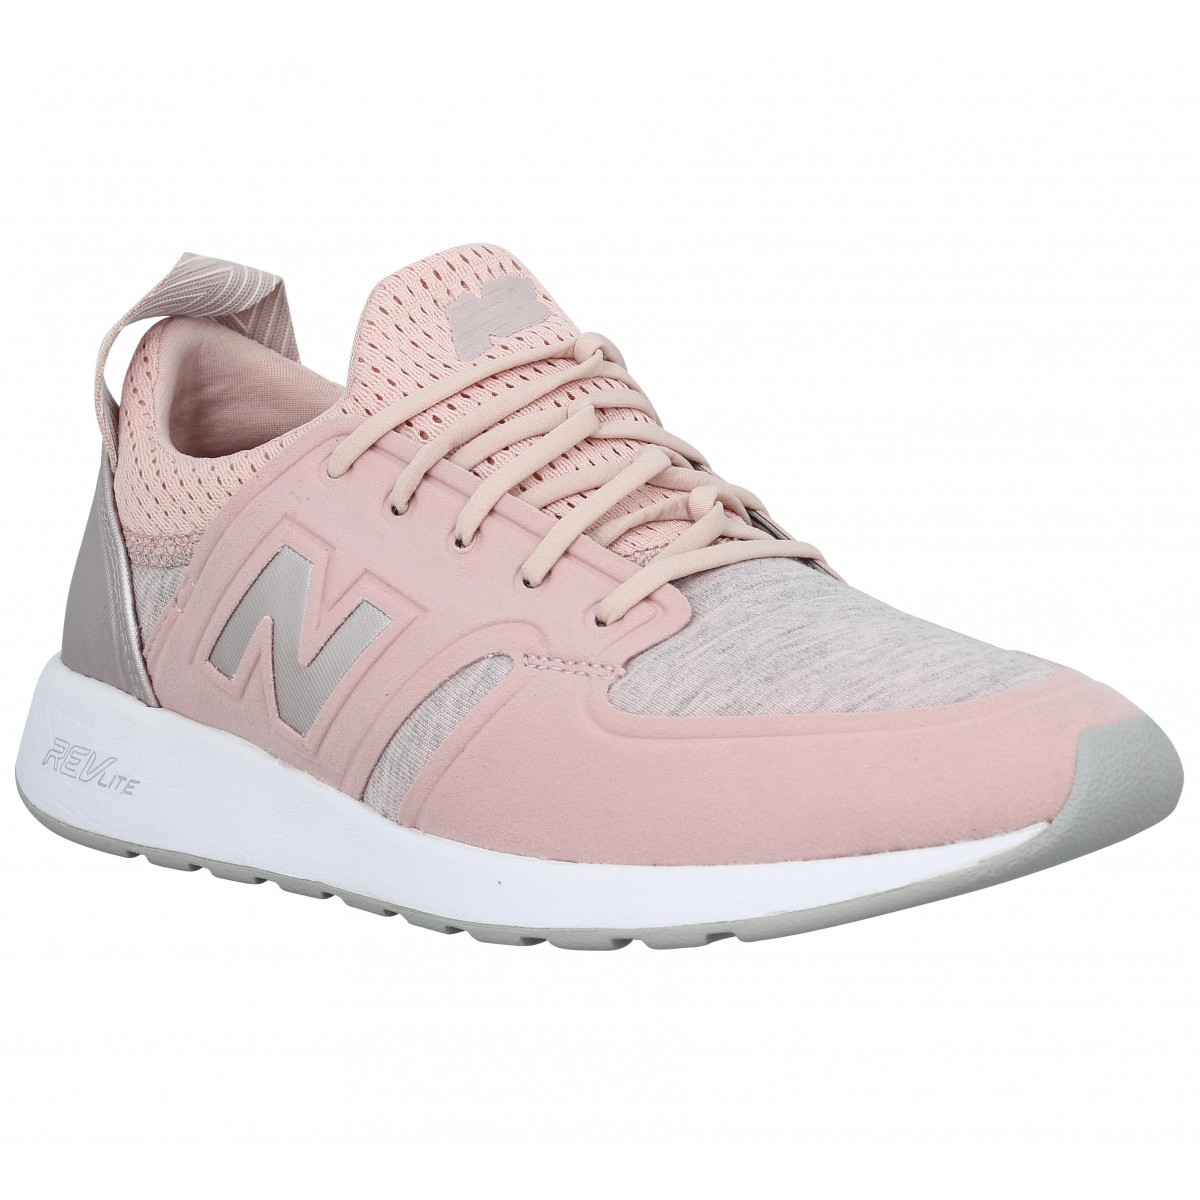 Chaussures New balance wrl 420 toile femme rose femme | Fanny ...